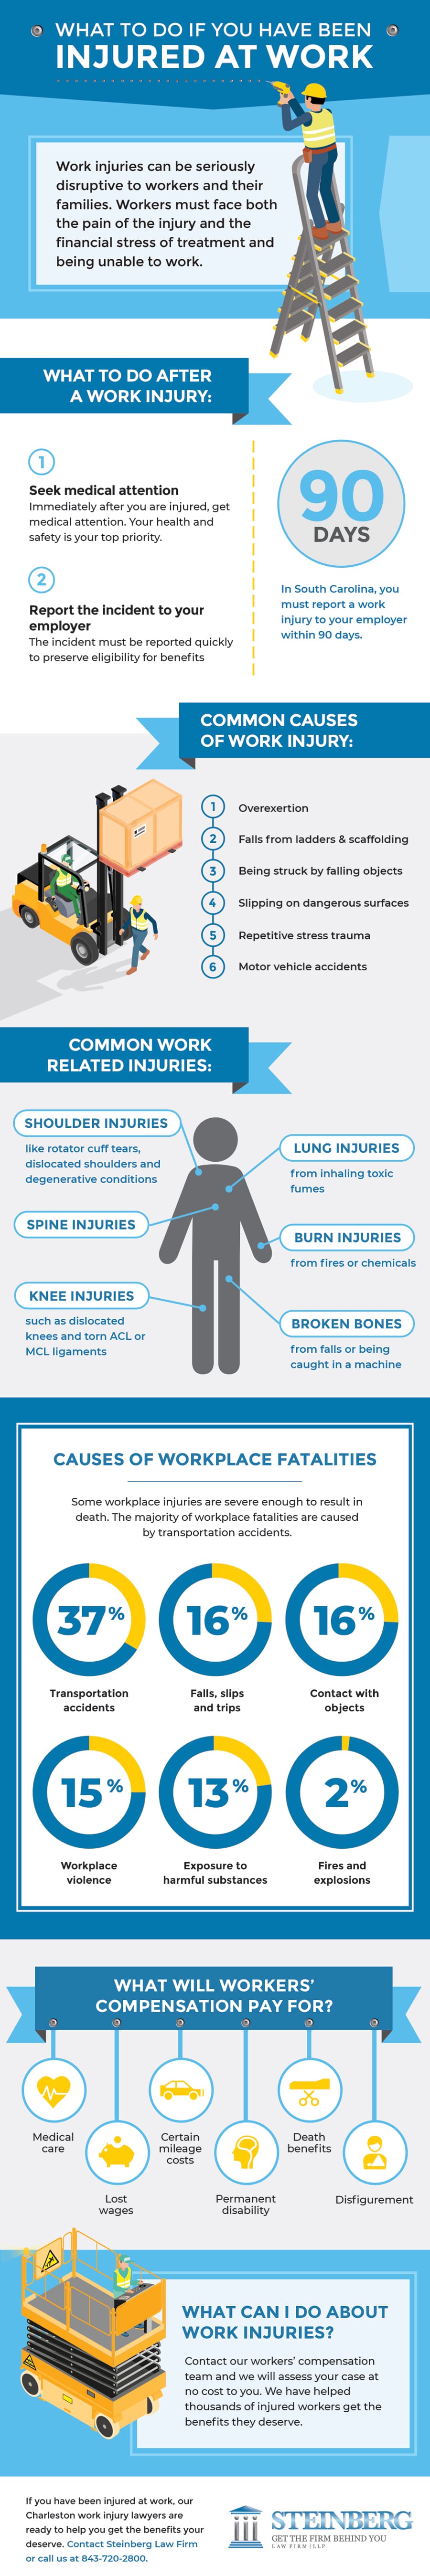 What to Do If You Have Been Injured at Work